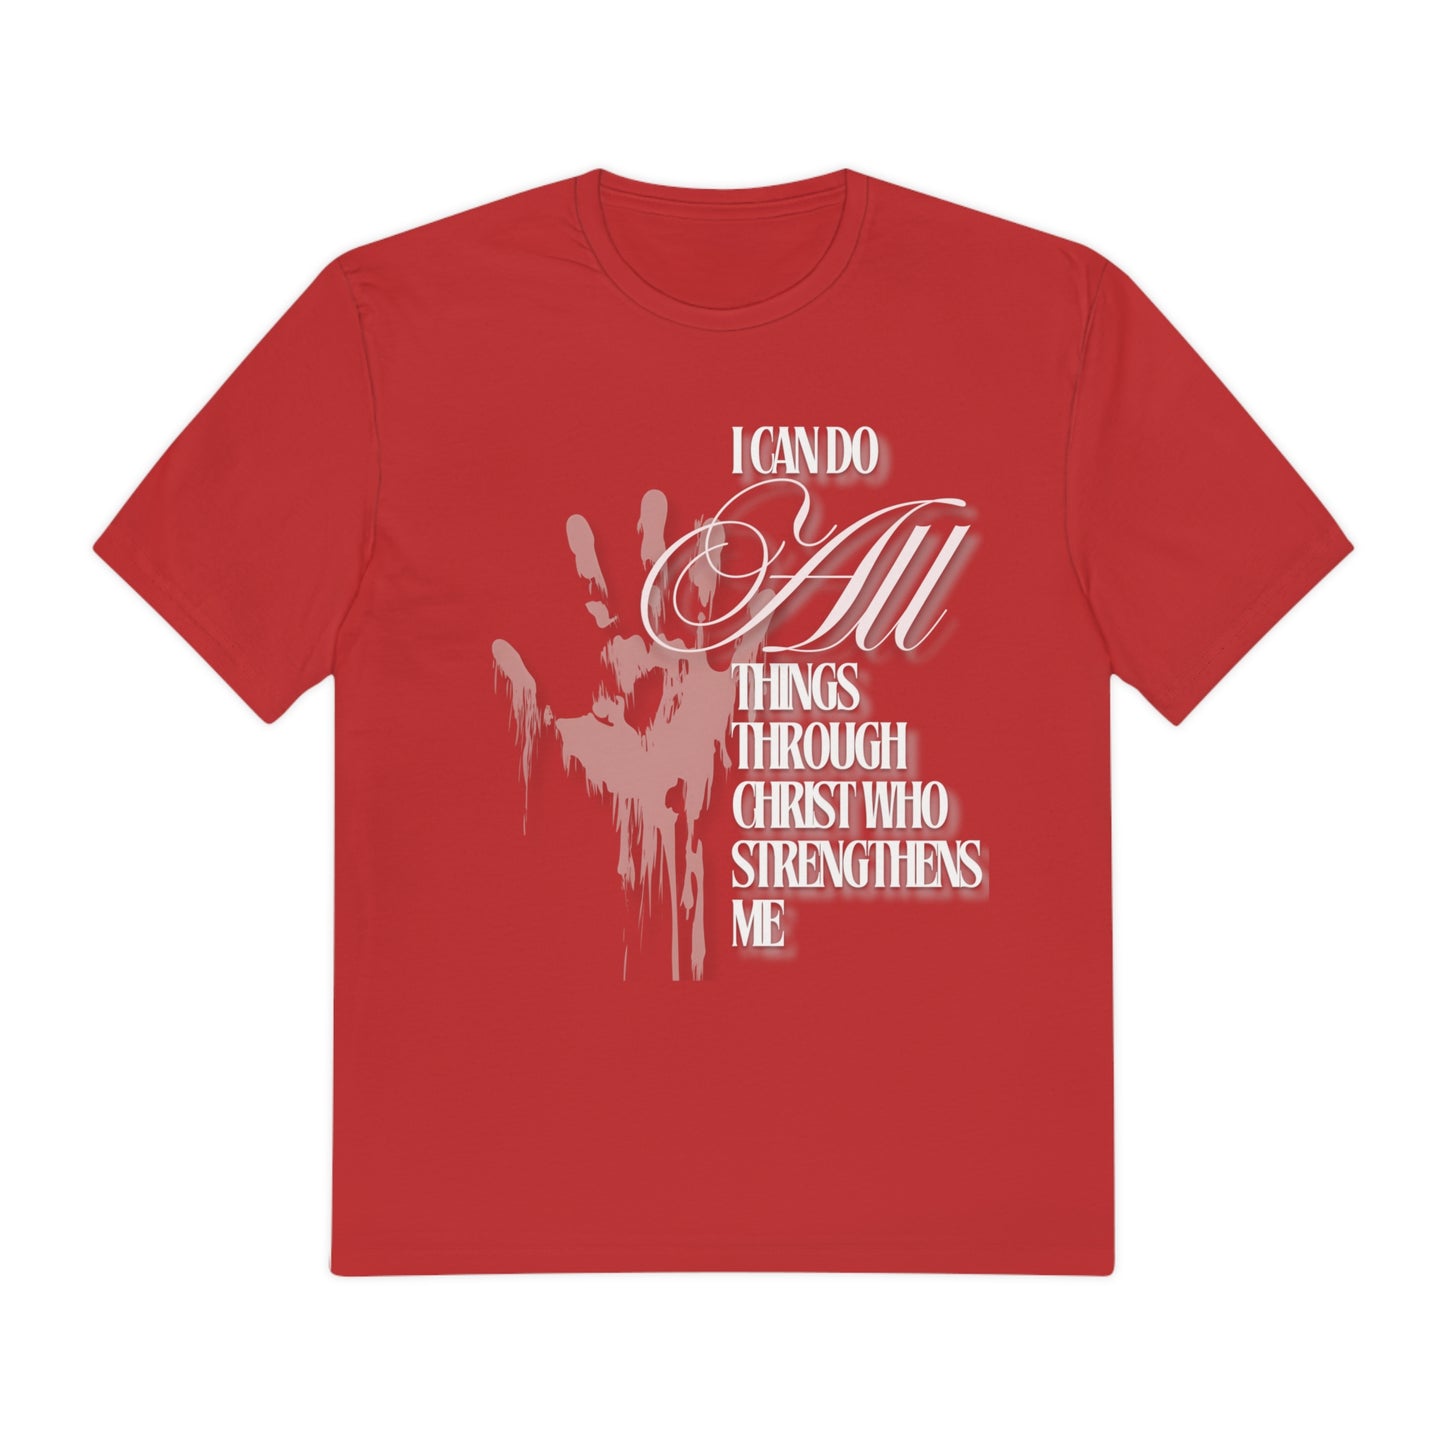 I Can Do All Things Through Christ" Tee - Christian Apparel